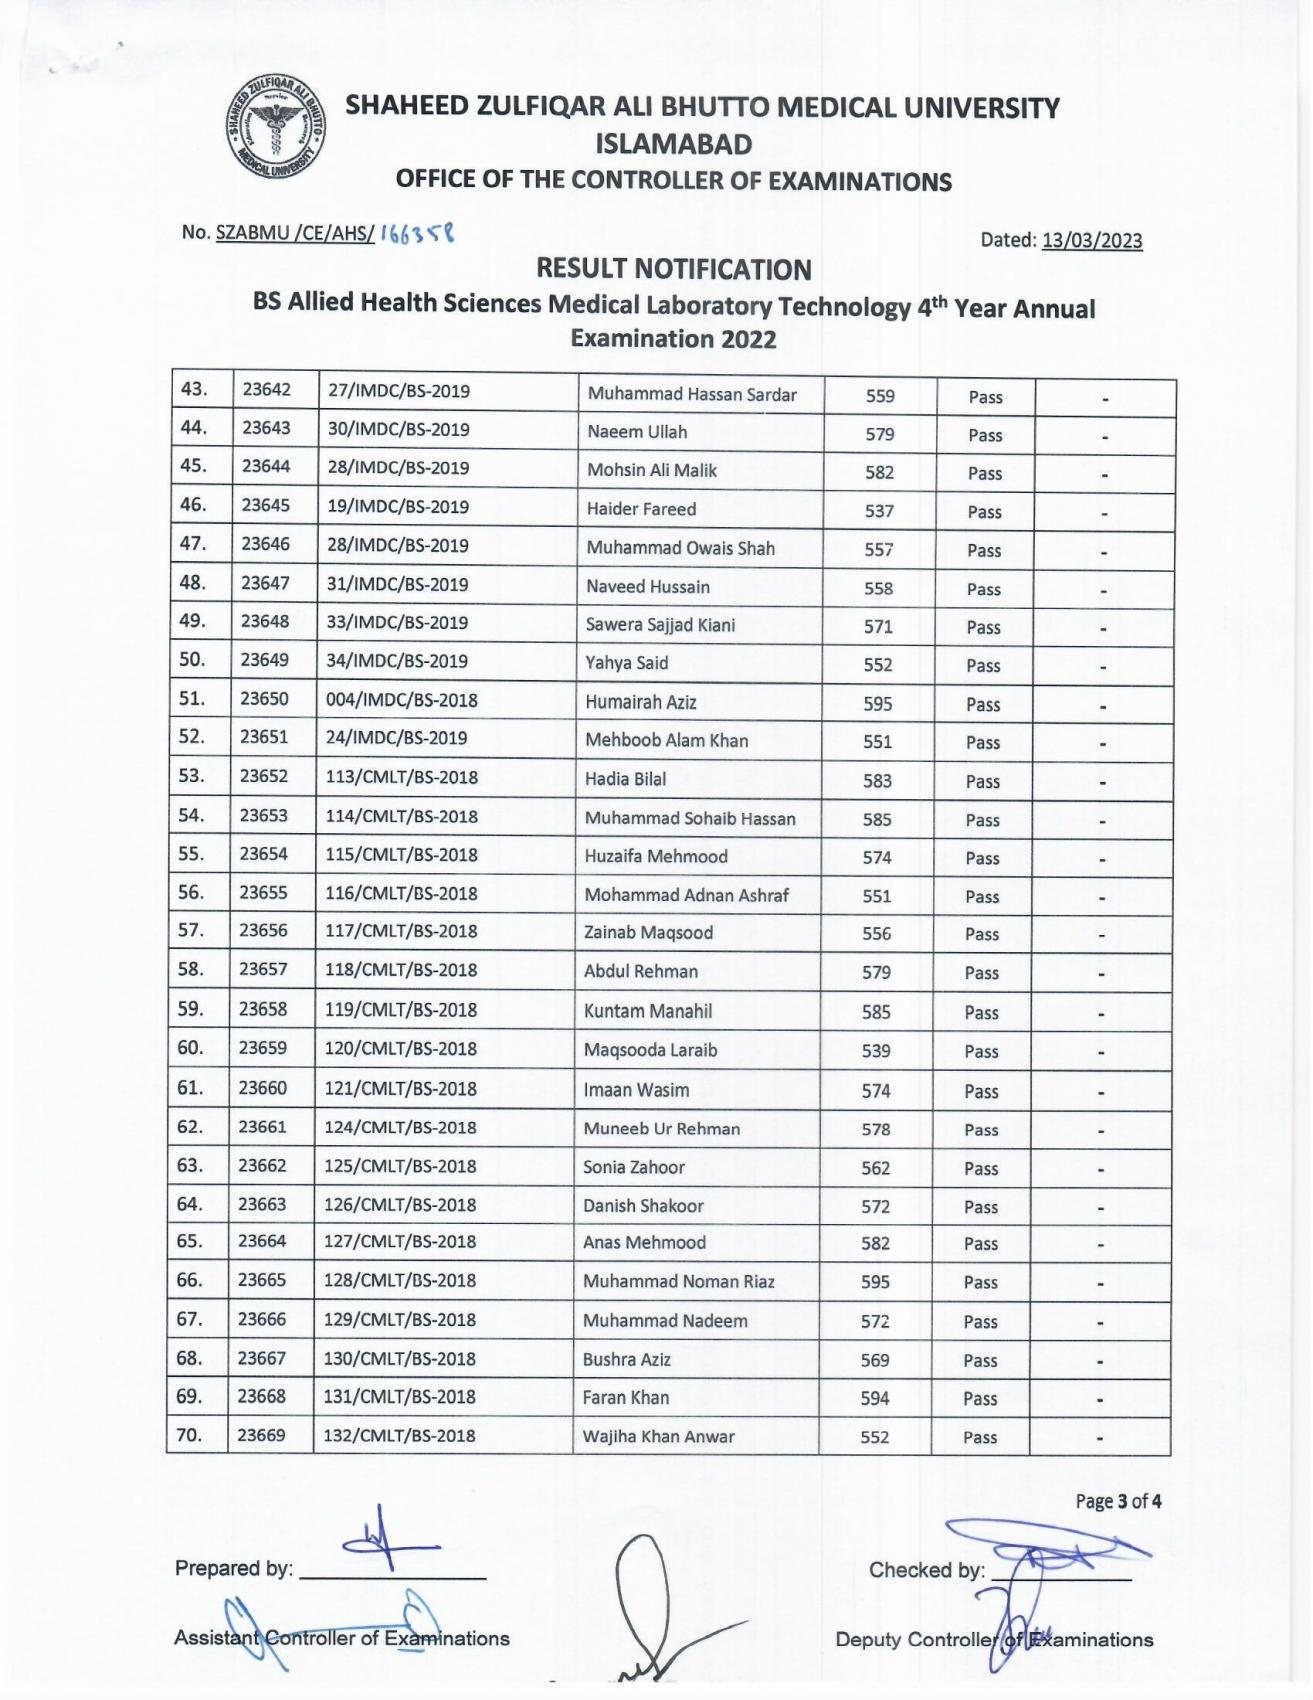 Result Notification - BS Allied Health Sciences MLT 4th Year Annual Examination 2022